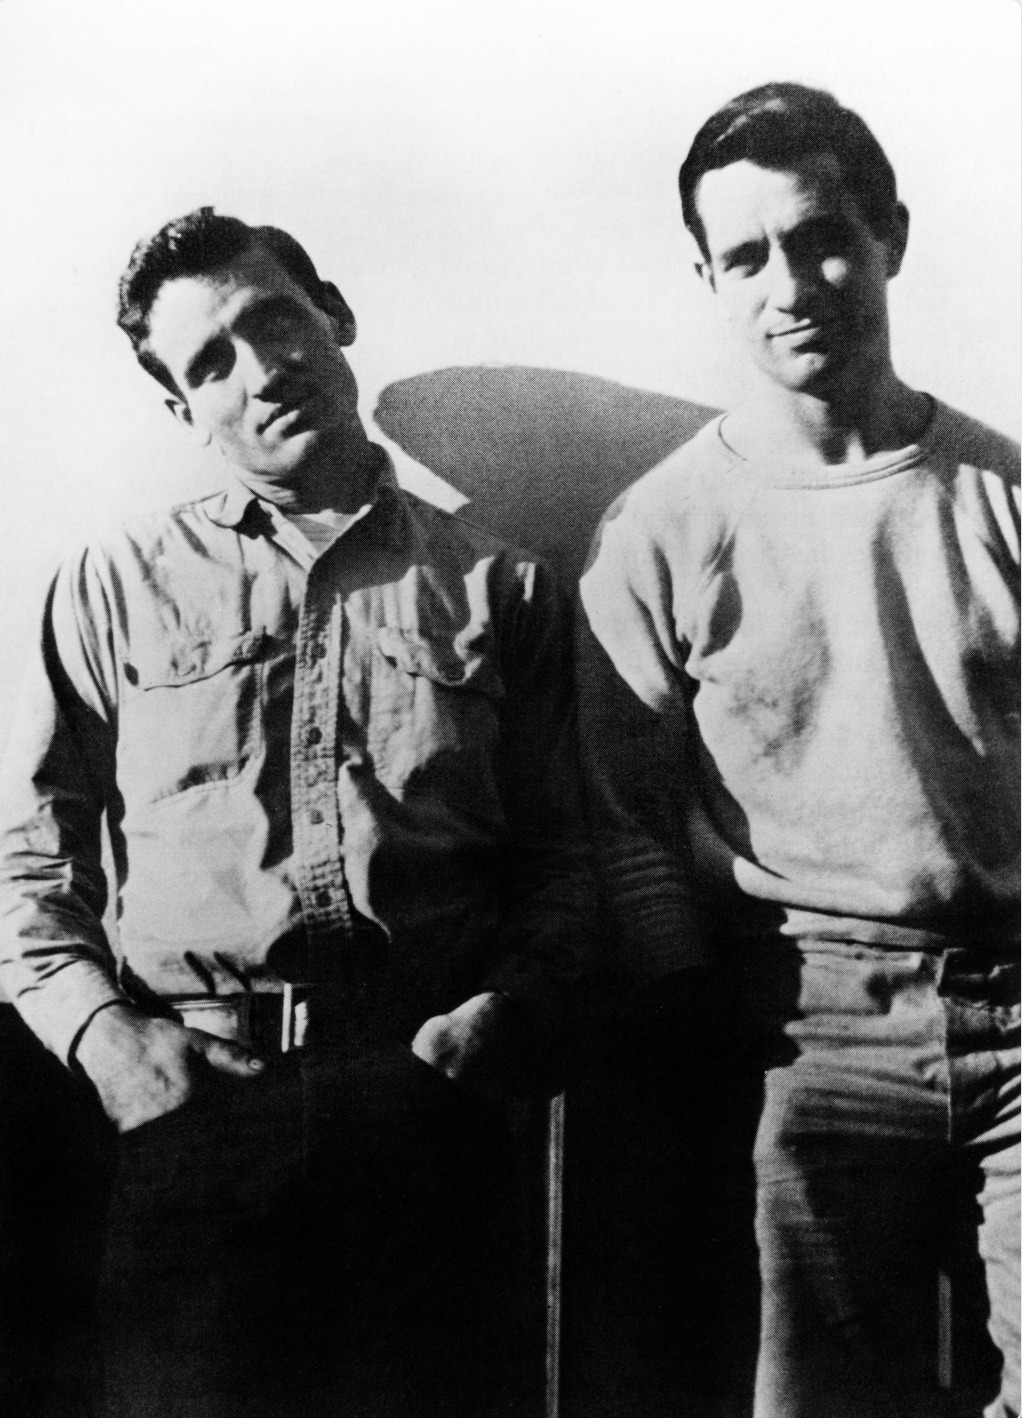 Jack Kerouac and Neal Cassady, pictured together in 1952